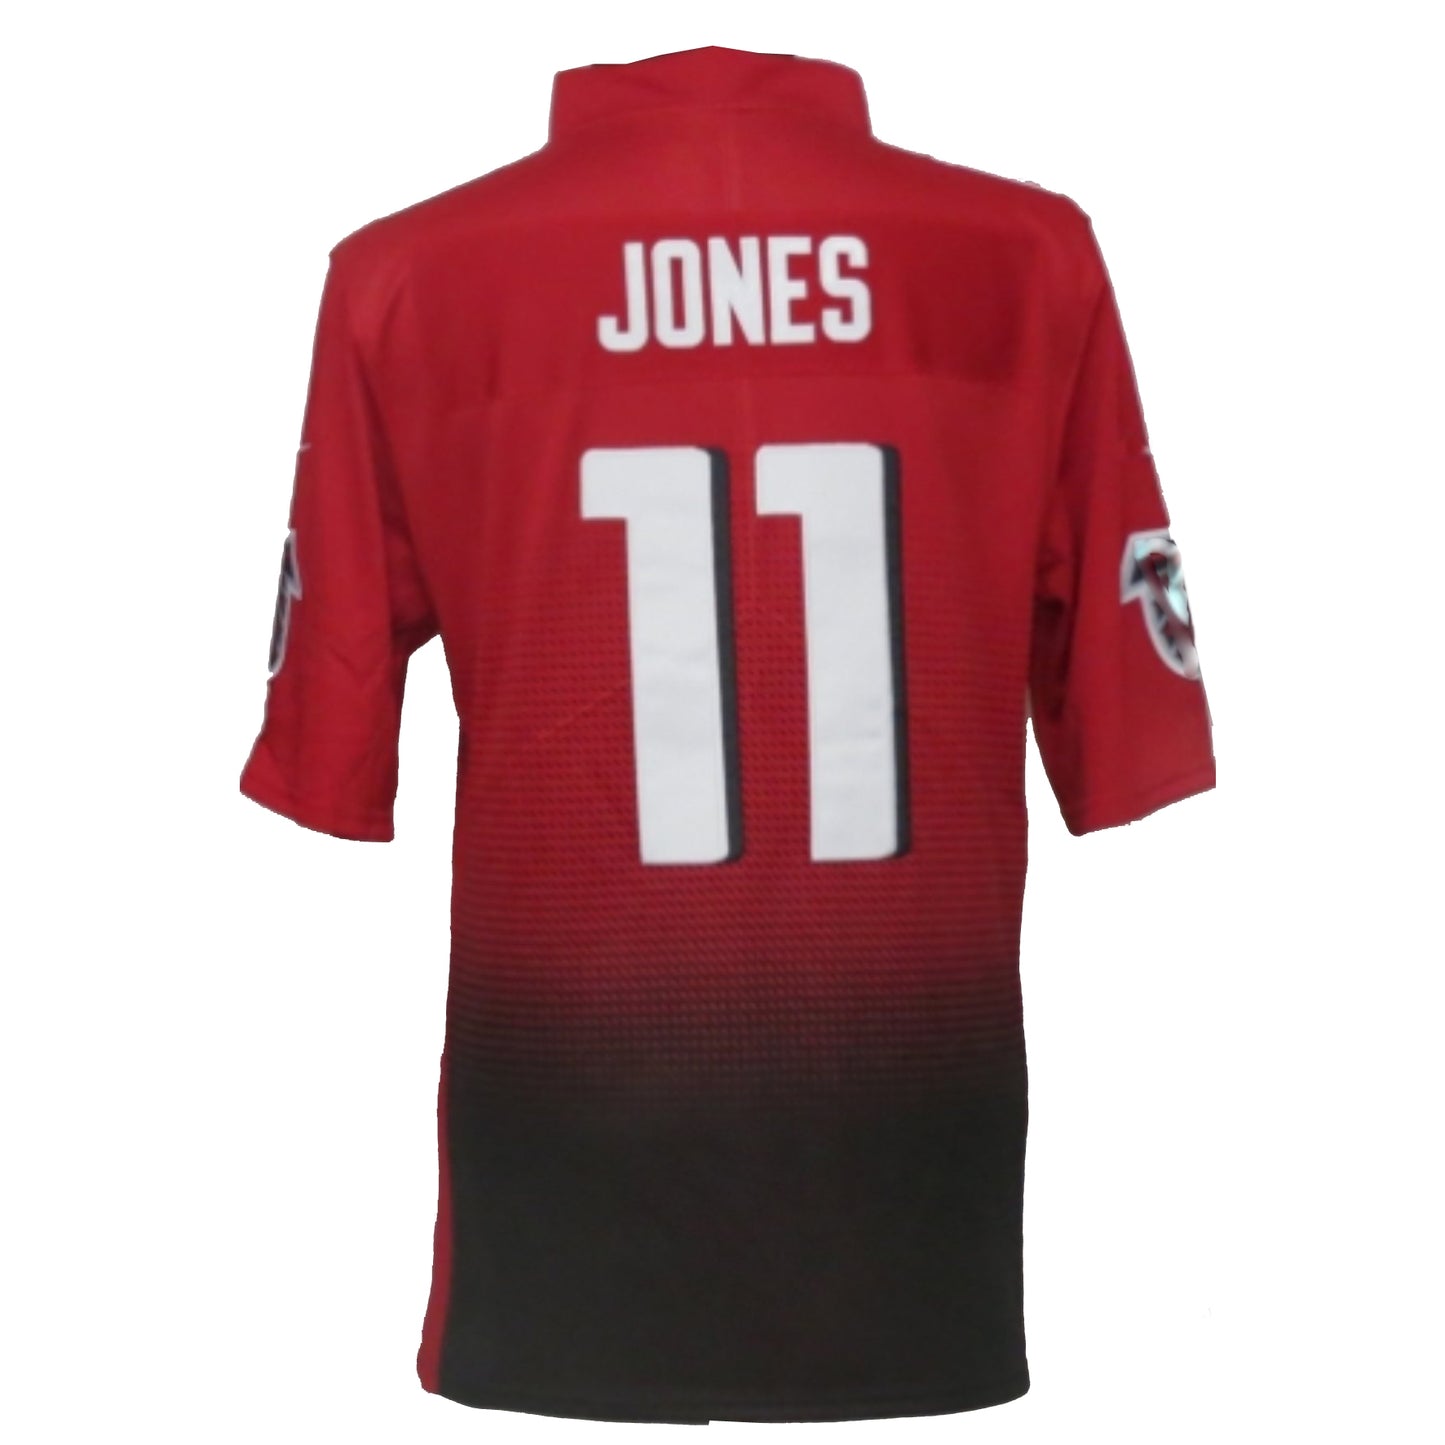 Atlanta Falcons Stitched American Football Jerseys Embroidered Julio Jones Number #11 Jersey